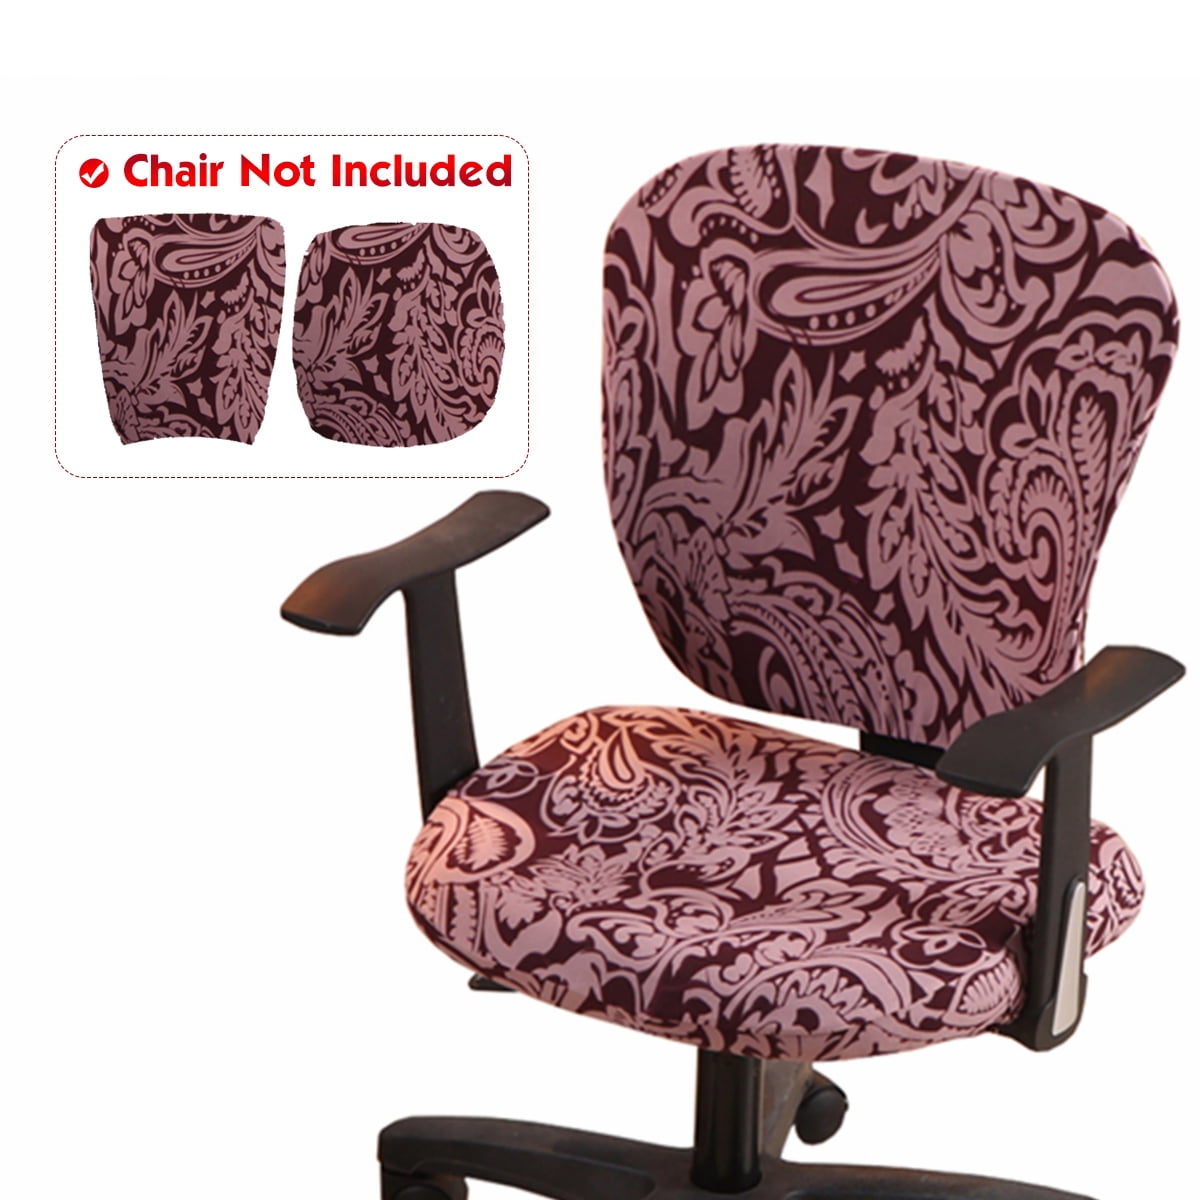 Modern Spandex Computer Chair Cover-8 Colors Options-Easy Washable Removable 